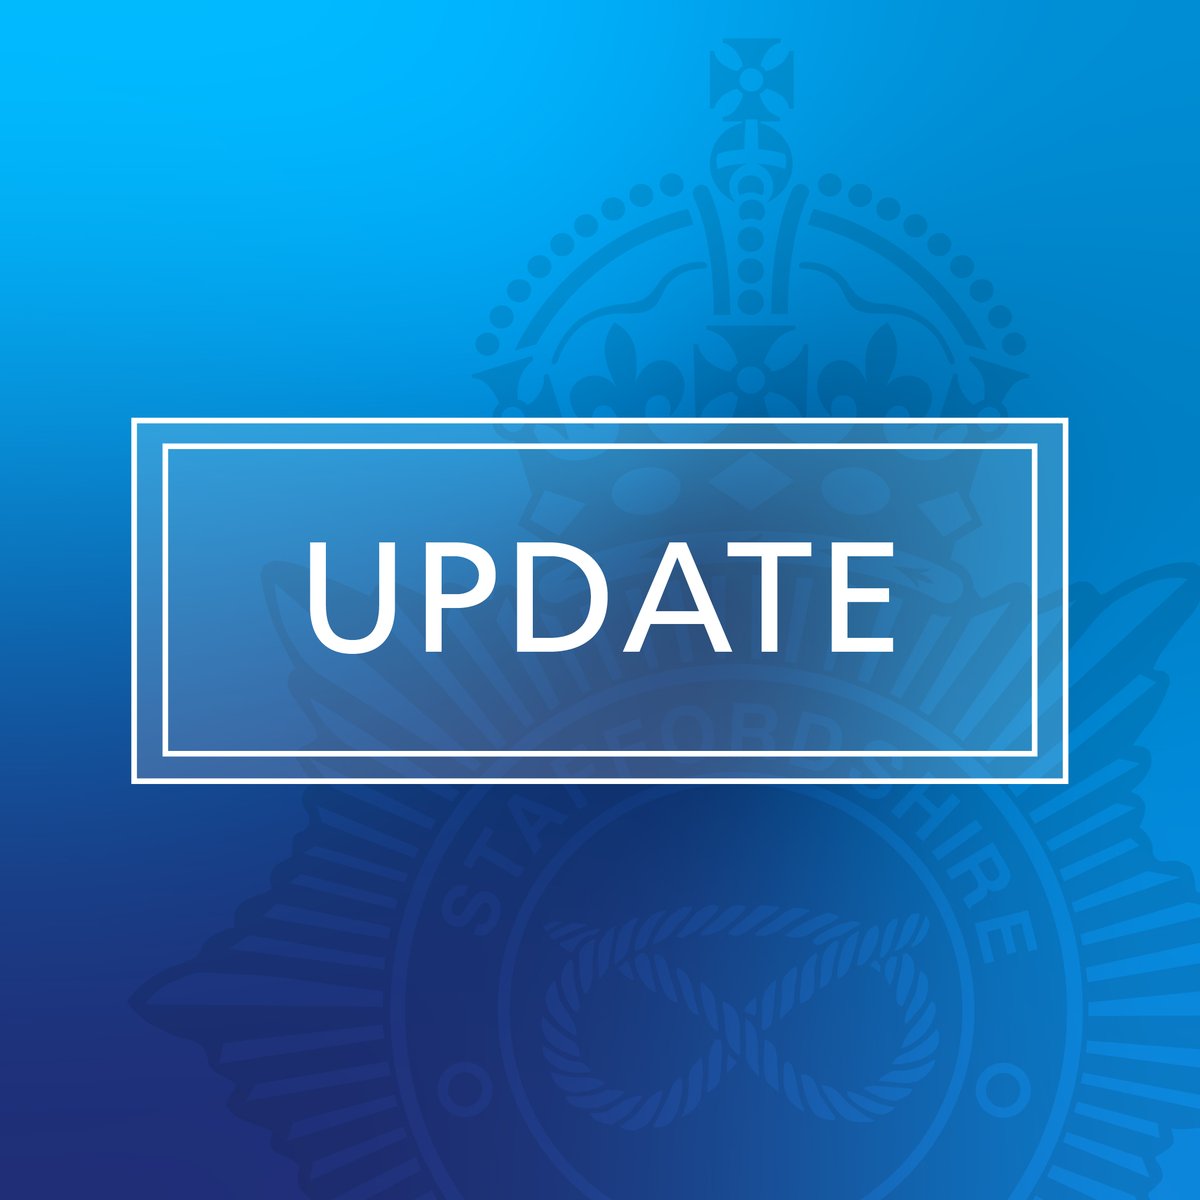 We have called off the search for 32-year-old missing person Kenneth, from Wolverhampton. Sadly, the body of a man was recovered on land near Pye Green, Cannock, last night (12 April). Formal identification will take place in due course. More here: orlo.uk/cdBGa